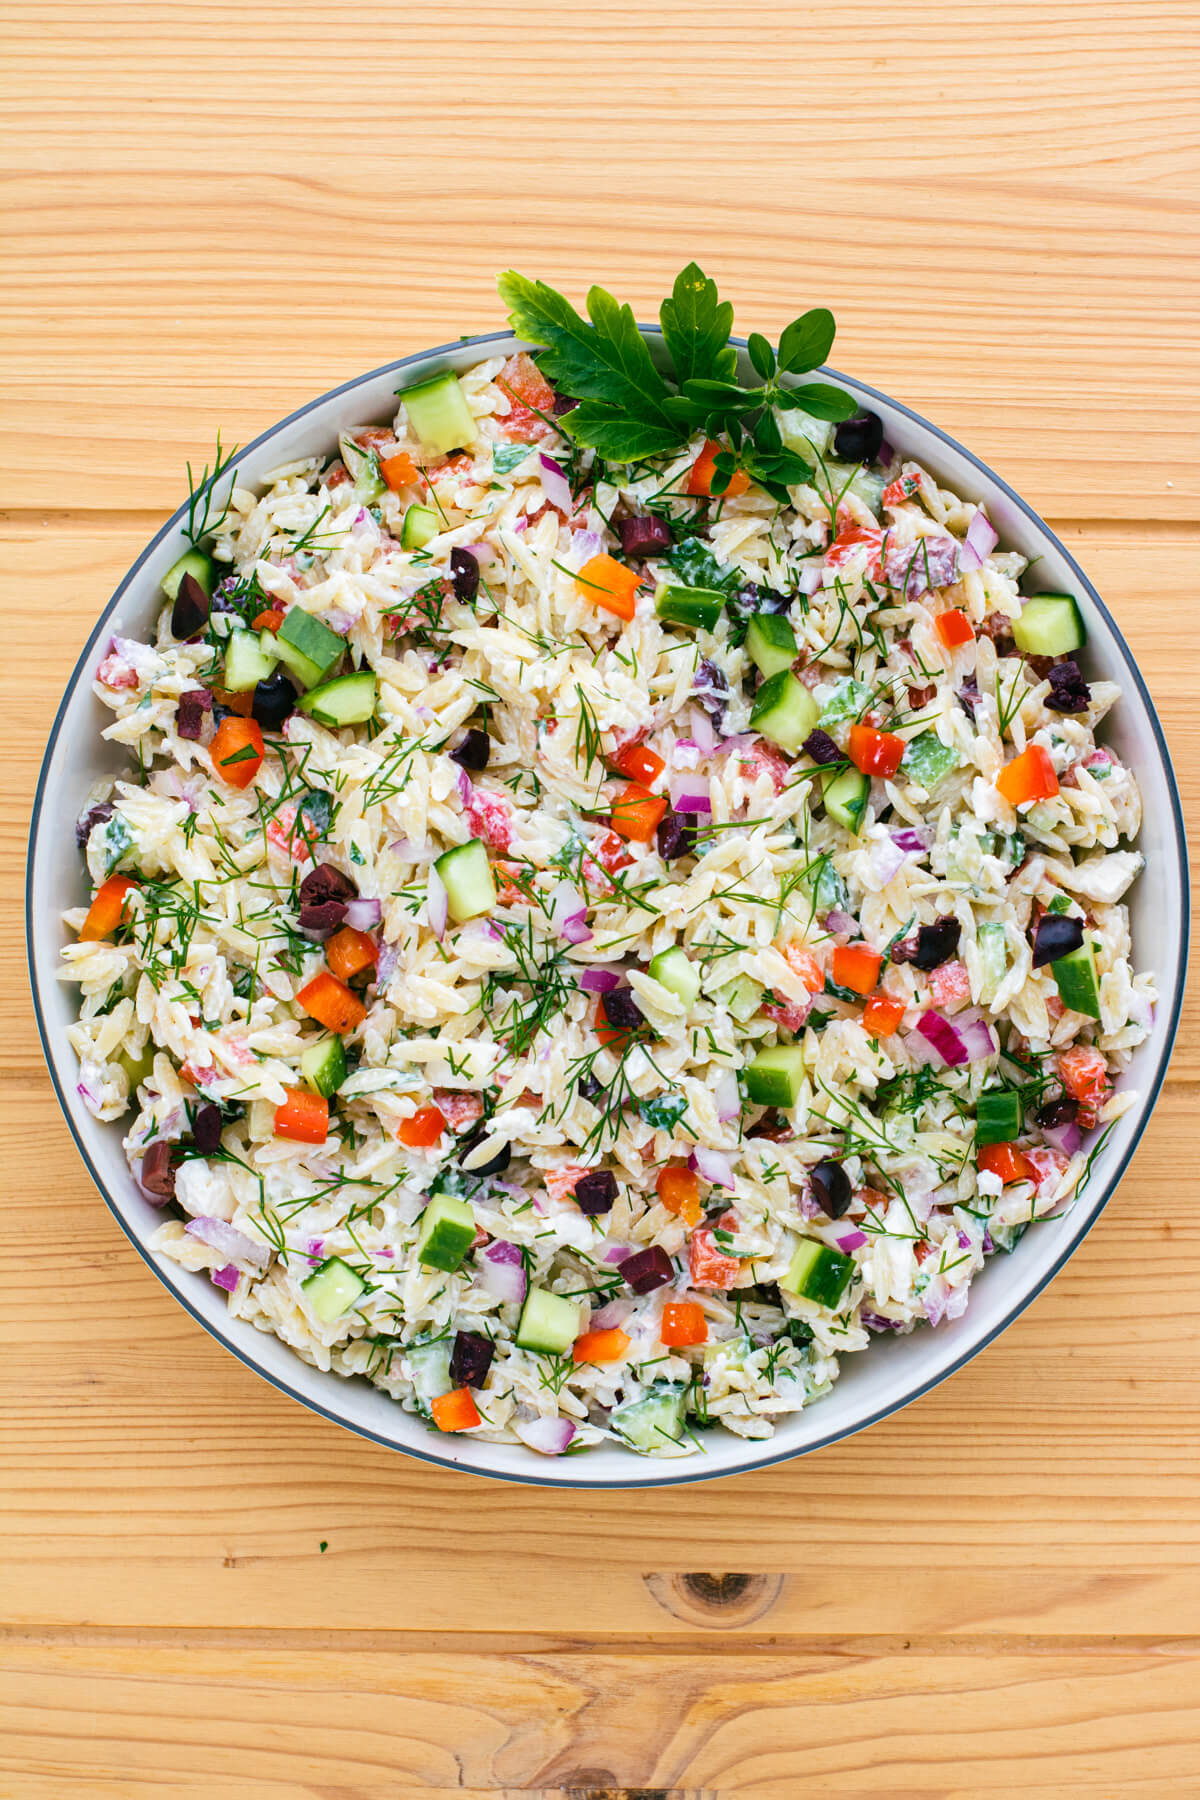 A white bowl holding a colourful Greek Orzo salad with feta cheese, green herbs, cucumbers, tomatoes, black olives, and peppers on a wooden background.